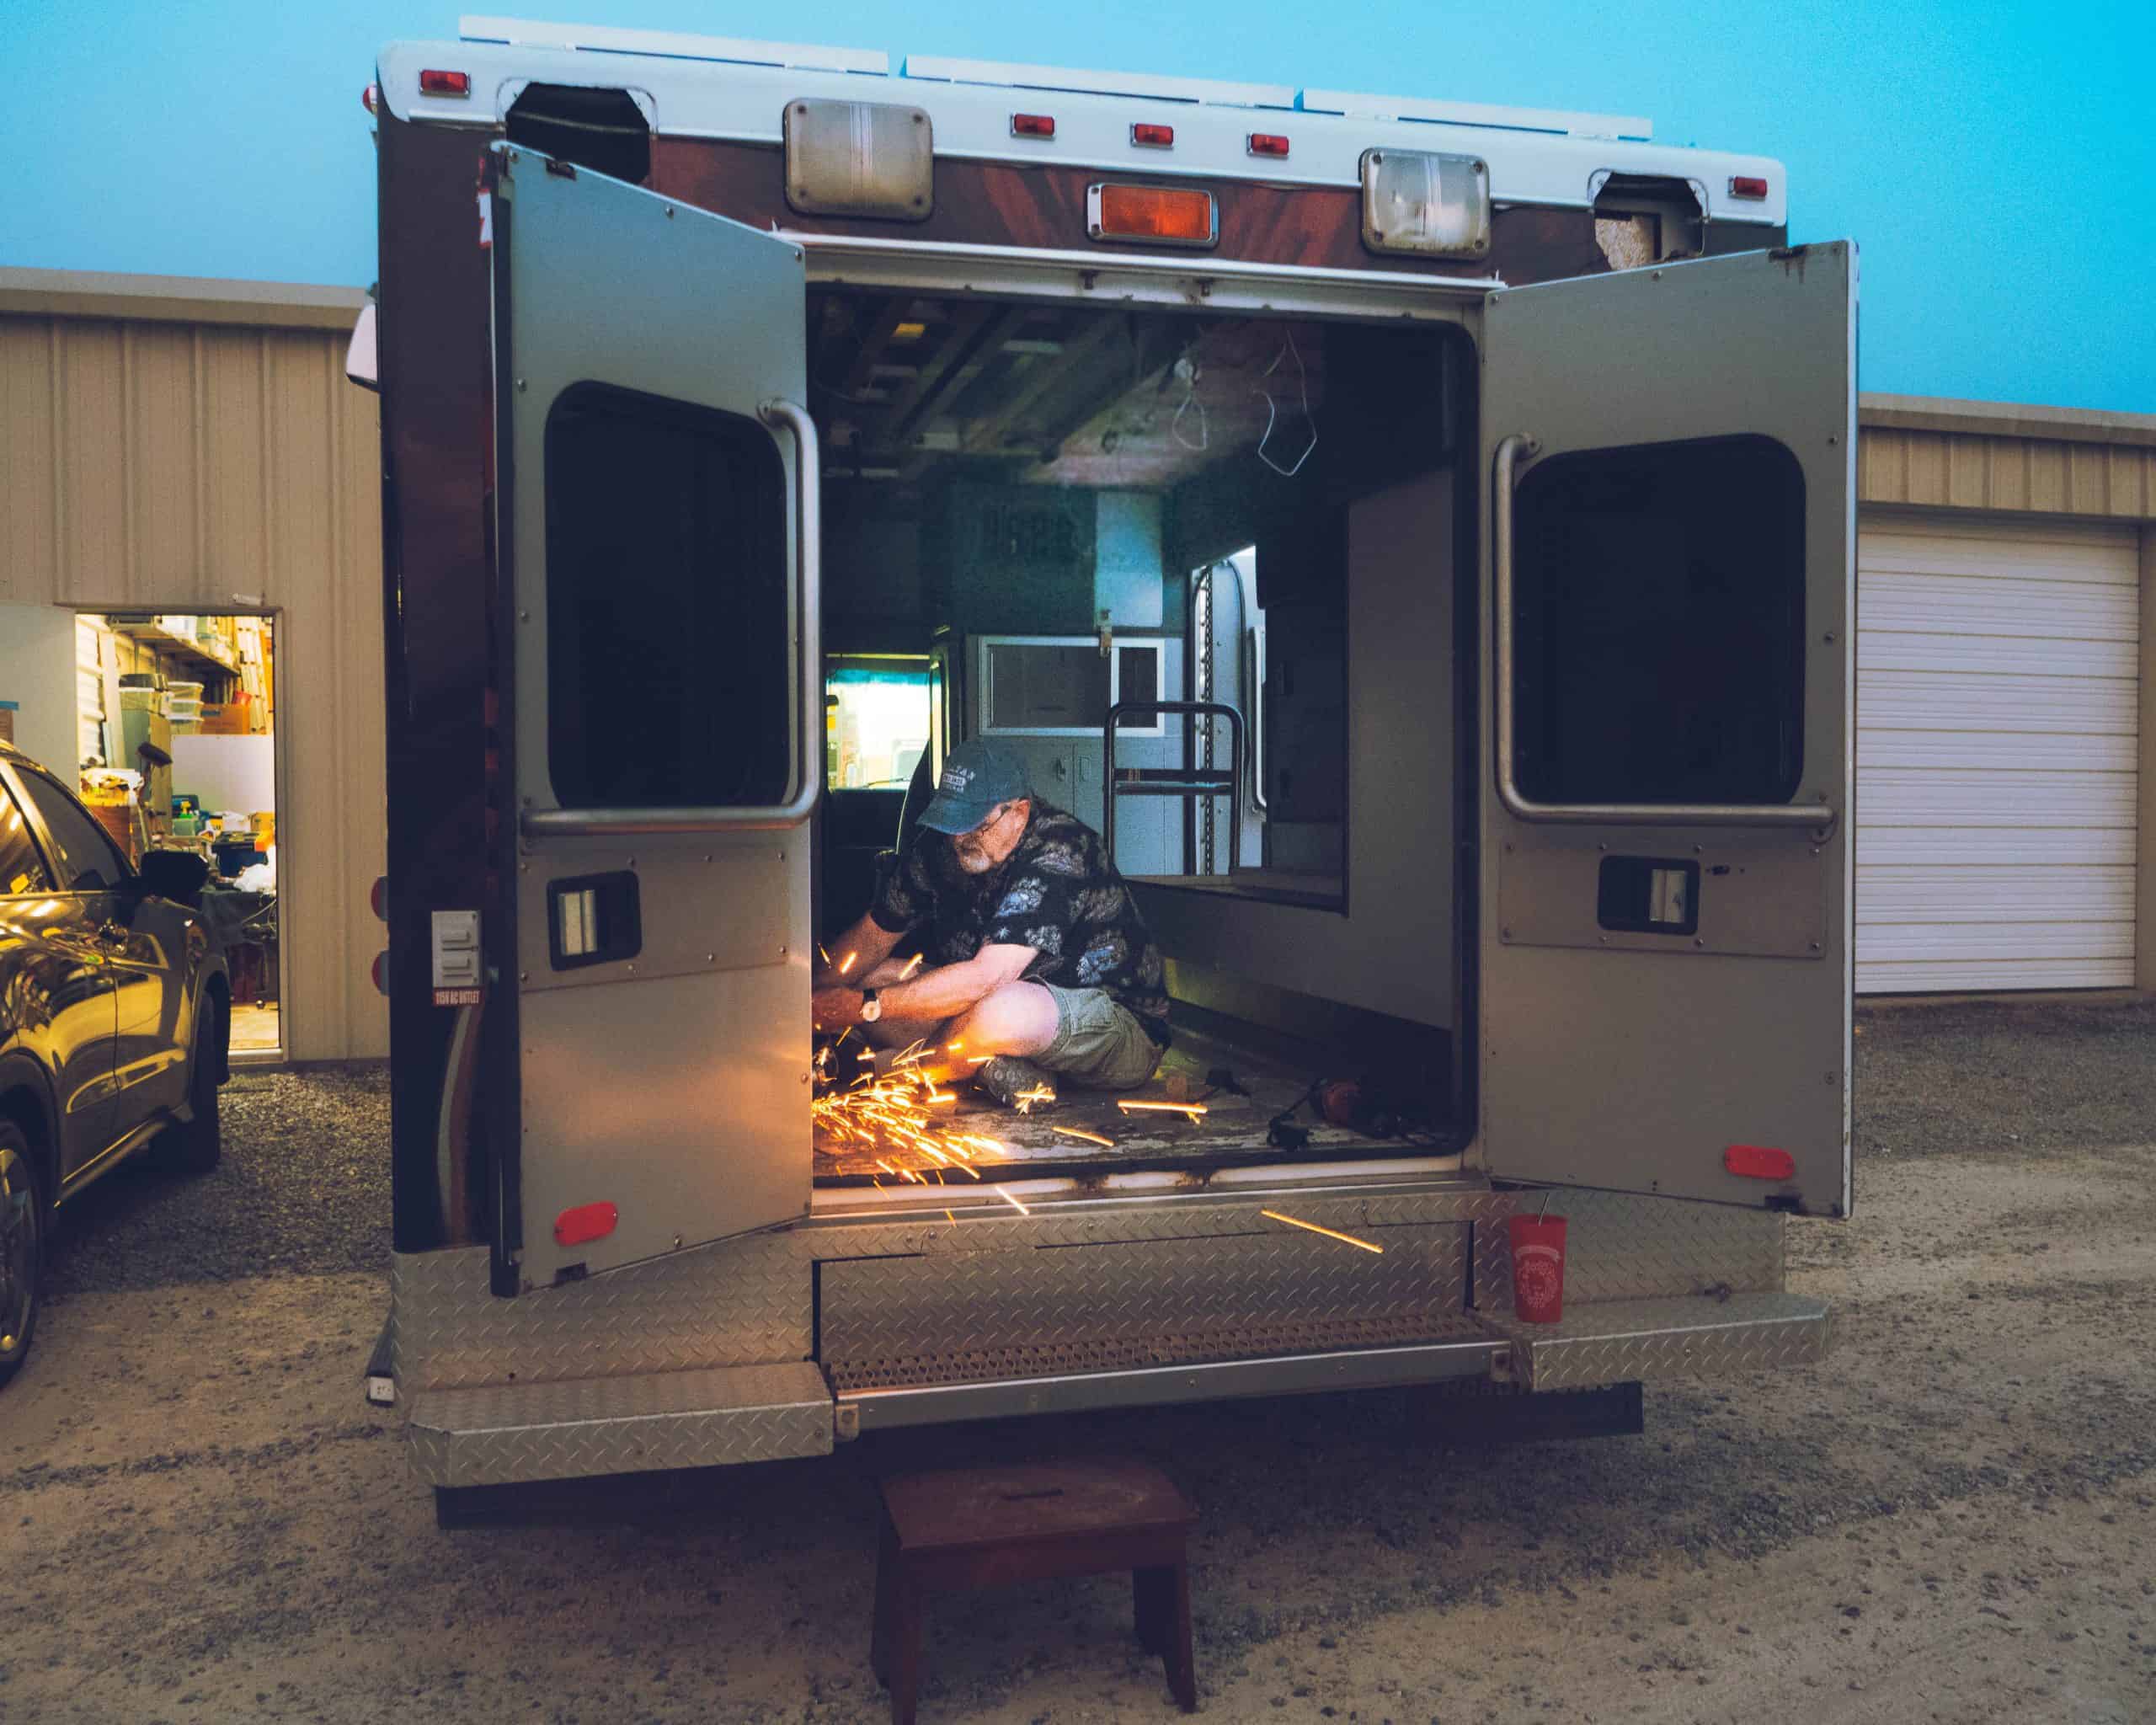 How Much Does It Cost To Convert An Ambulance Into A Camper?